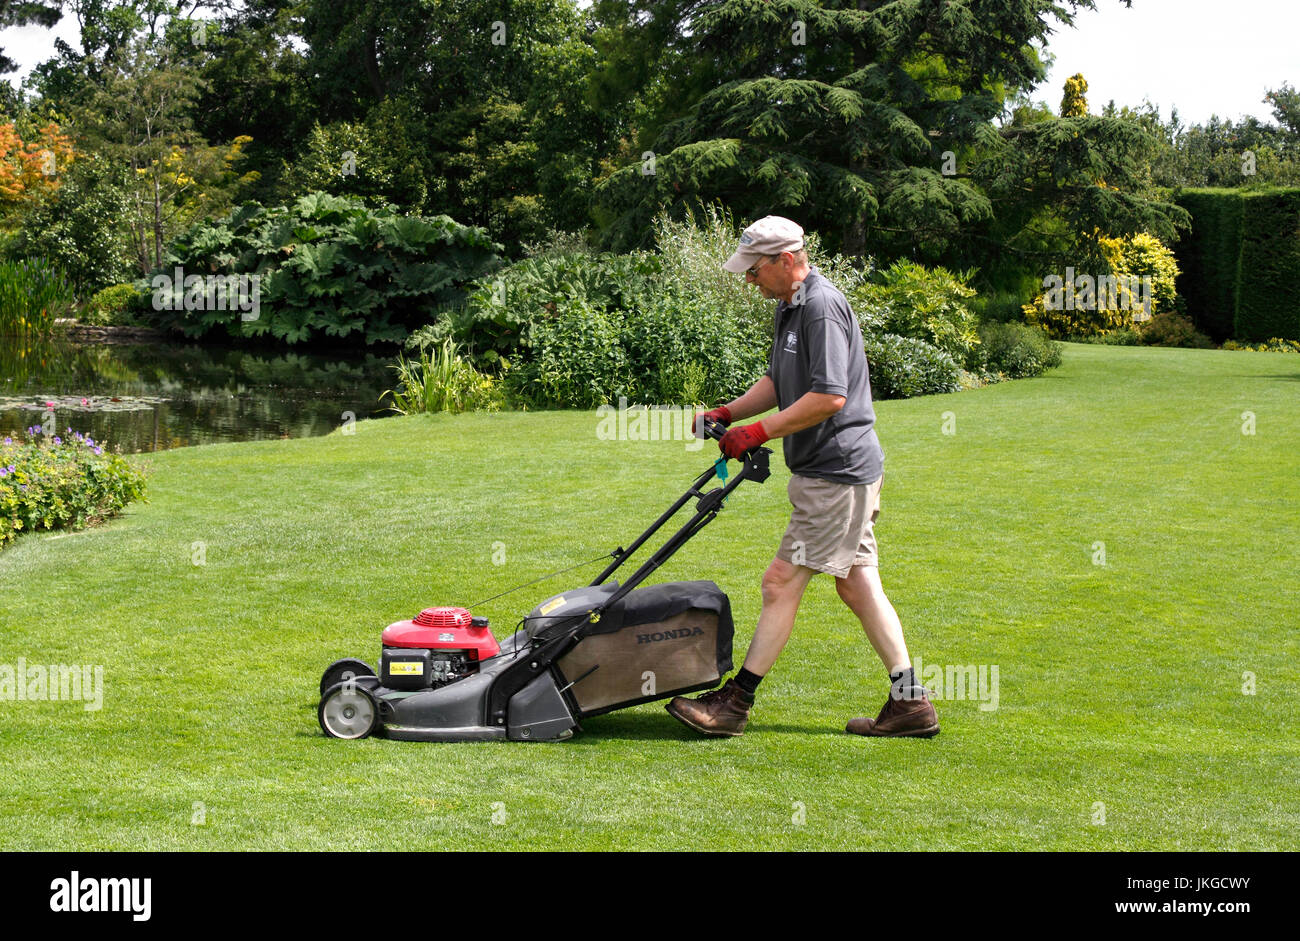 A MALE GARDENER CUTTING GRASS WITH A PETROL DRIVEN MOWER Stock Photo